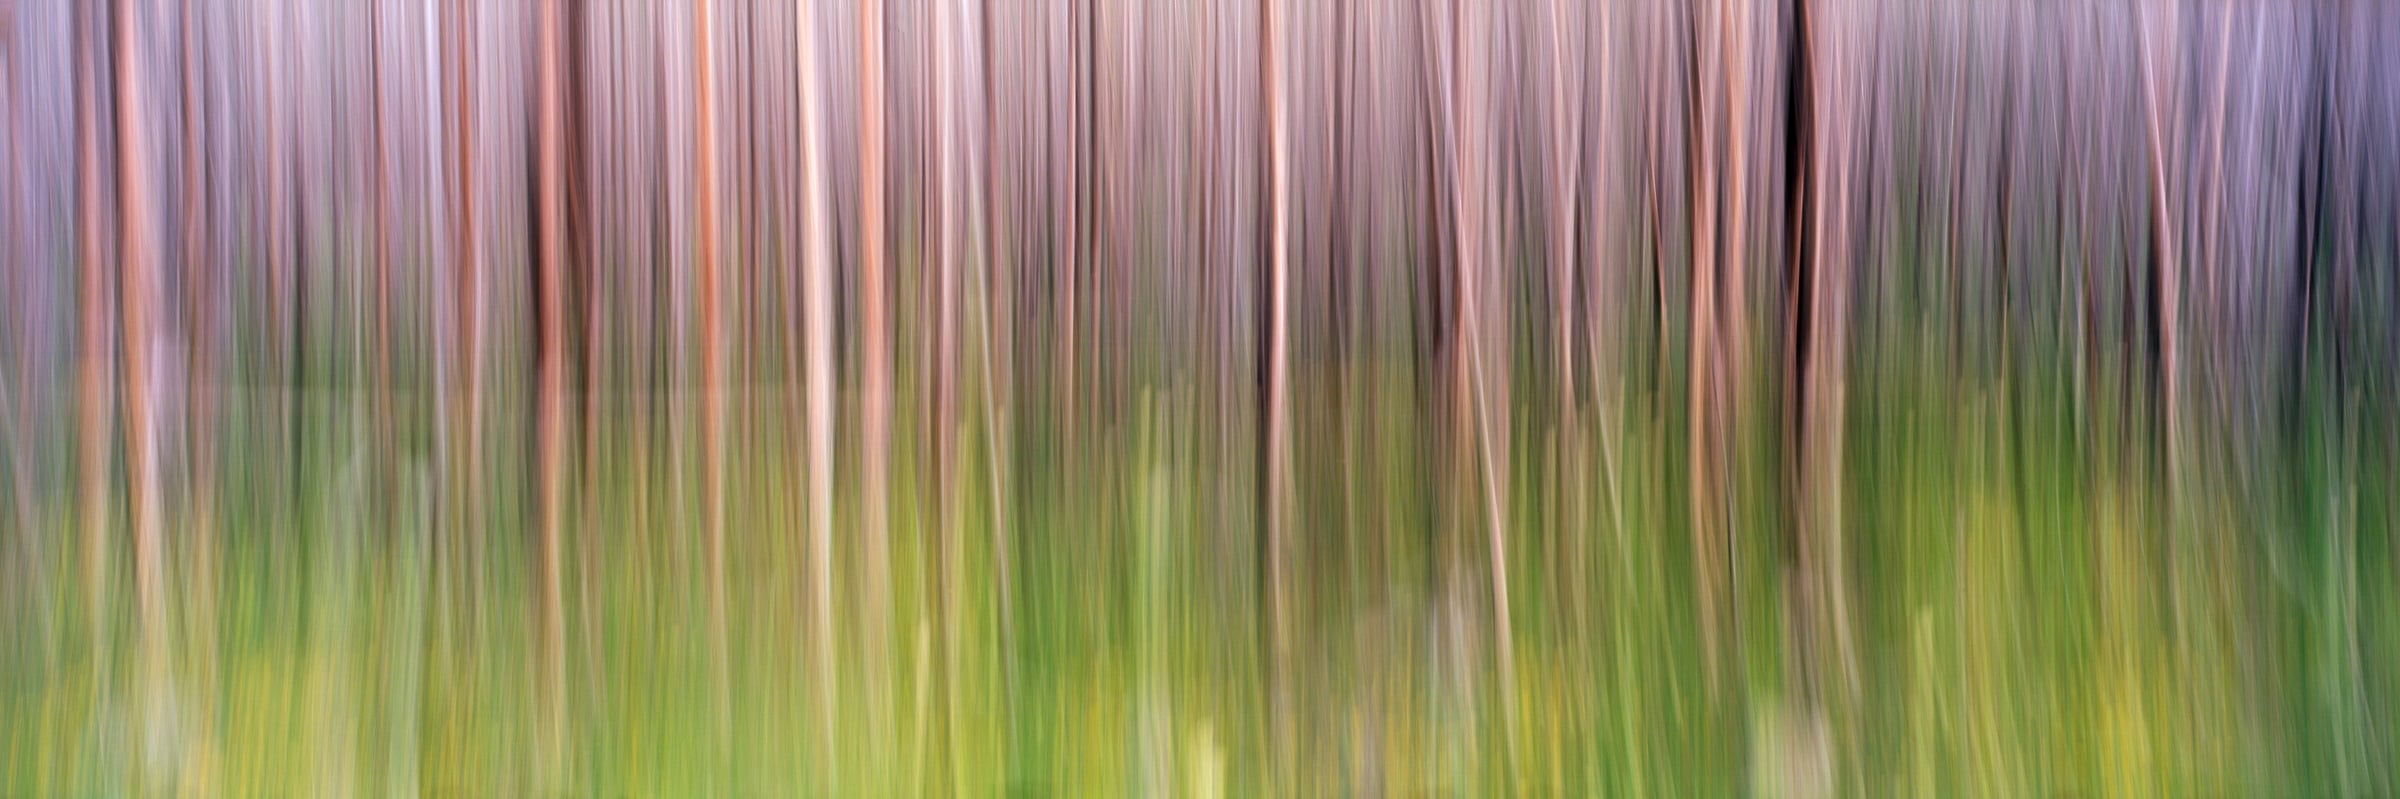 335 megapixels! A very high resolution, large-format, abstract forest photo; fine art photograph created by Scott Dimond in Waterton National Park, Alberta, Canada.